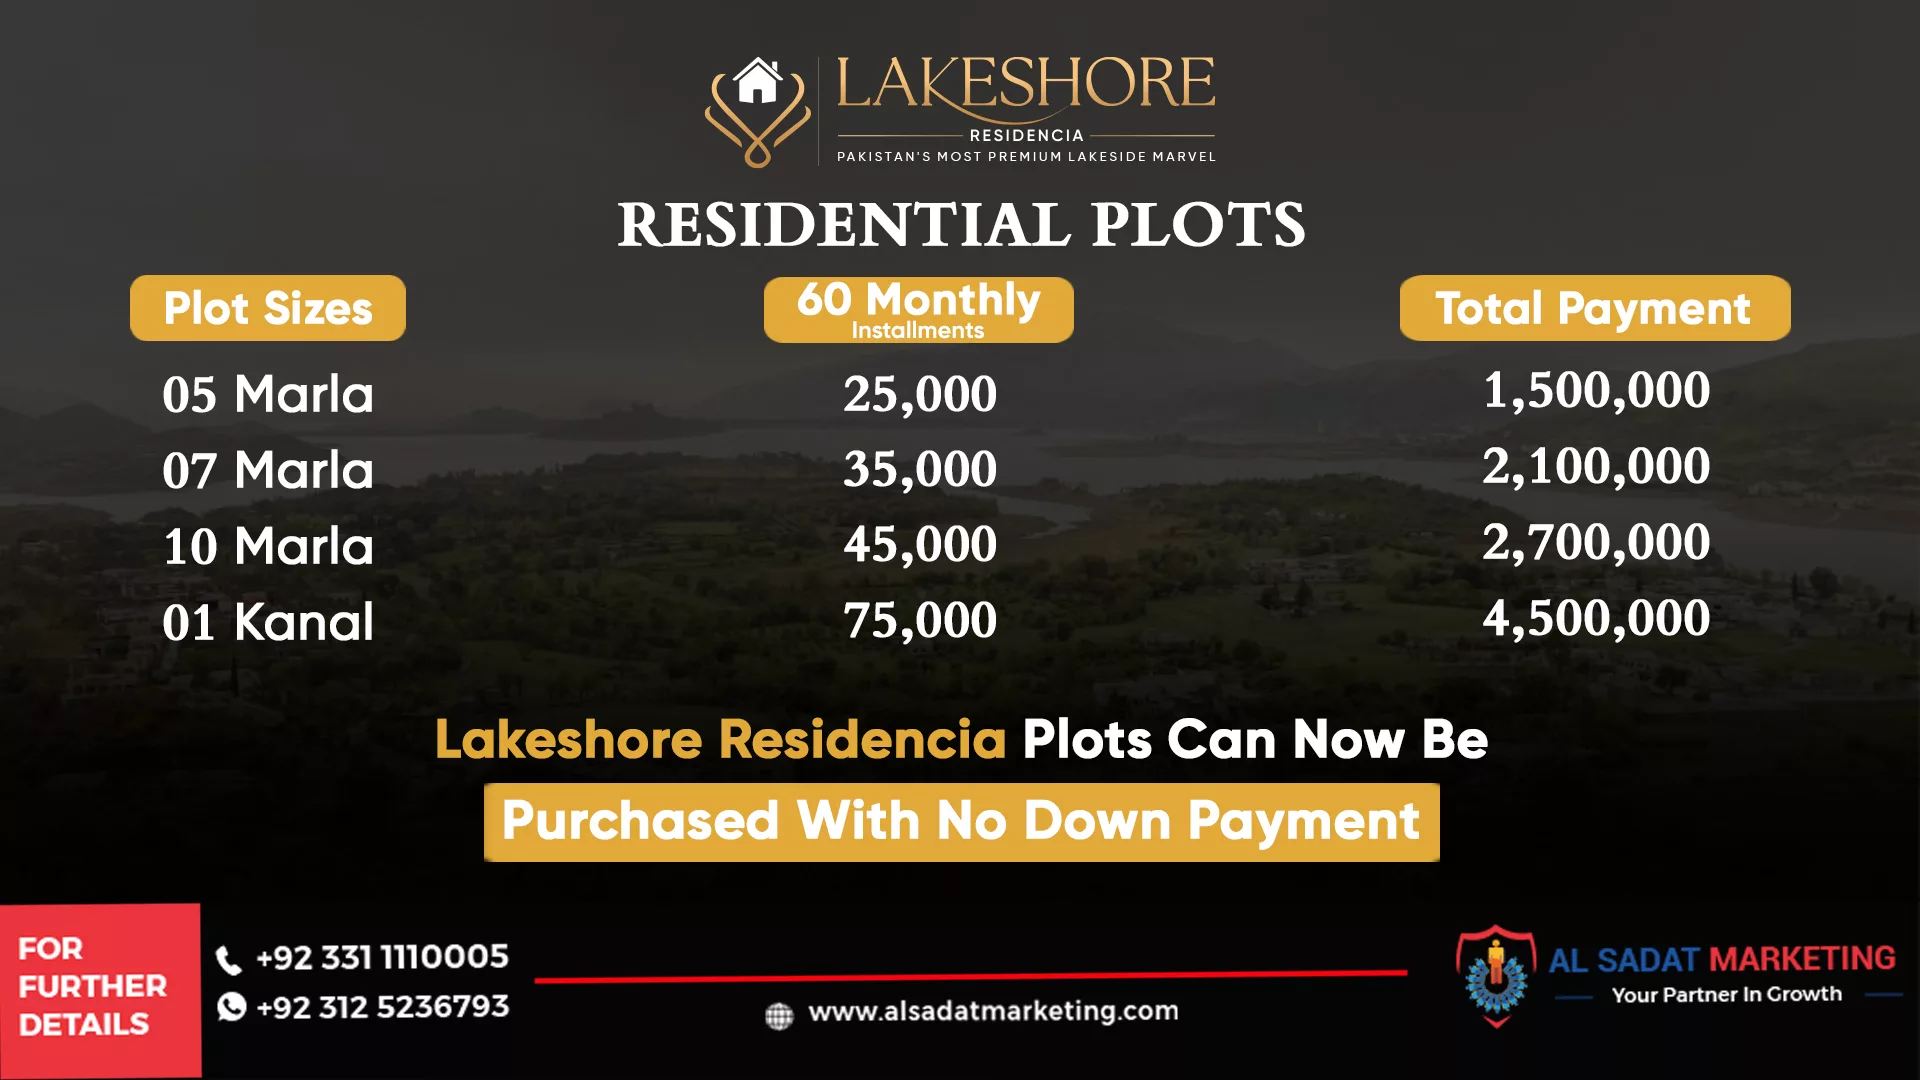 lakeshore residencia payment paln - no down payment - no balloon payments - lakeshore city